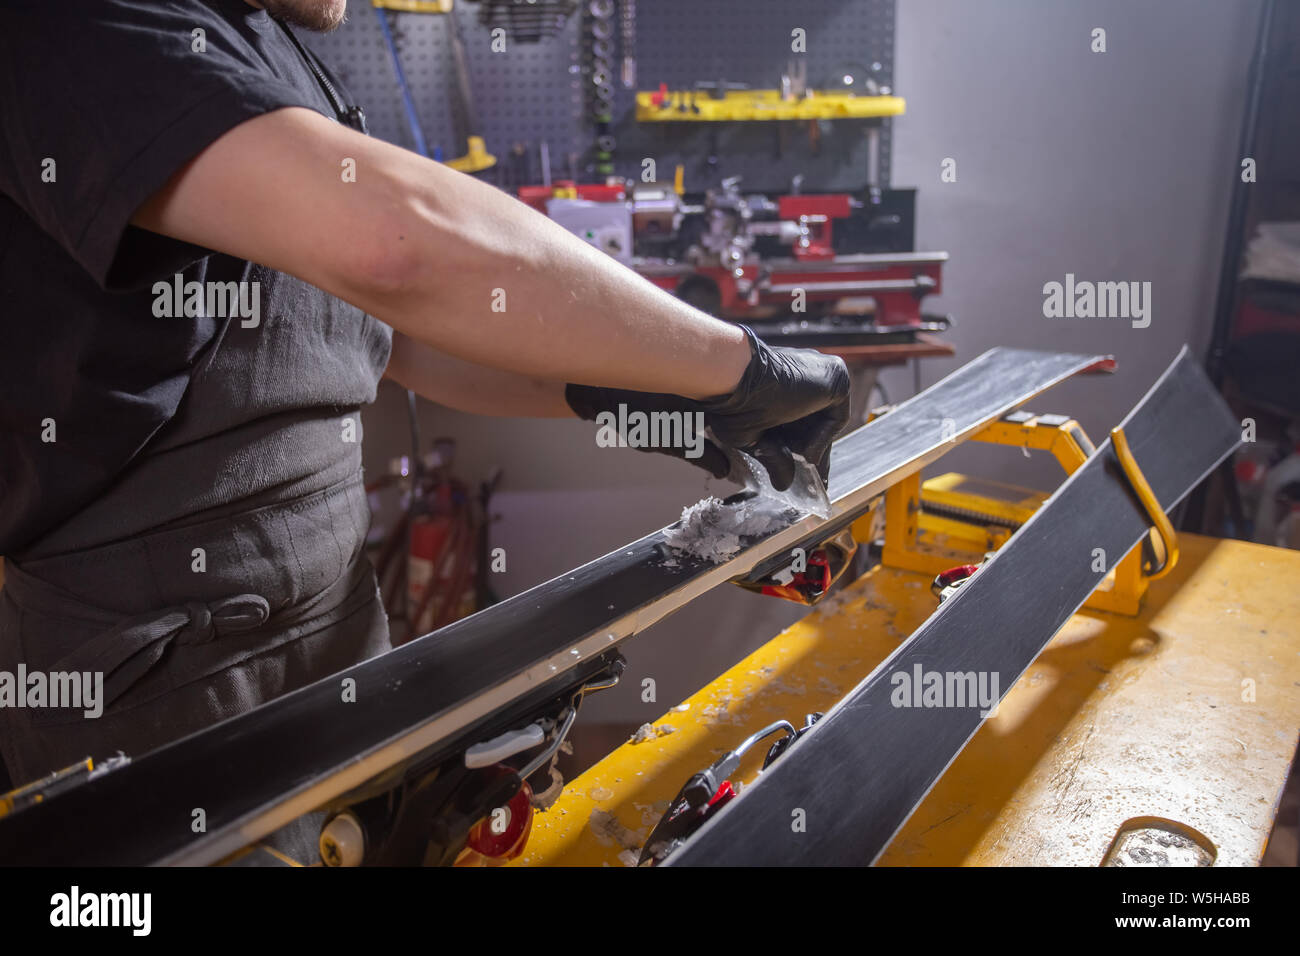 Work and repair concept - a man's hands repairing the ski by rubbing a paraffin Stock Photo